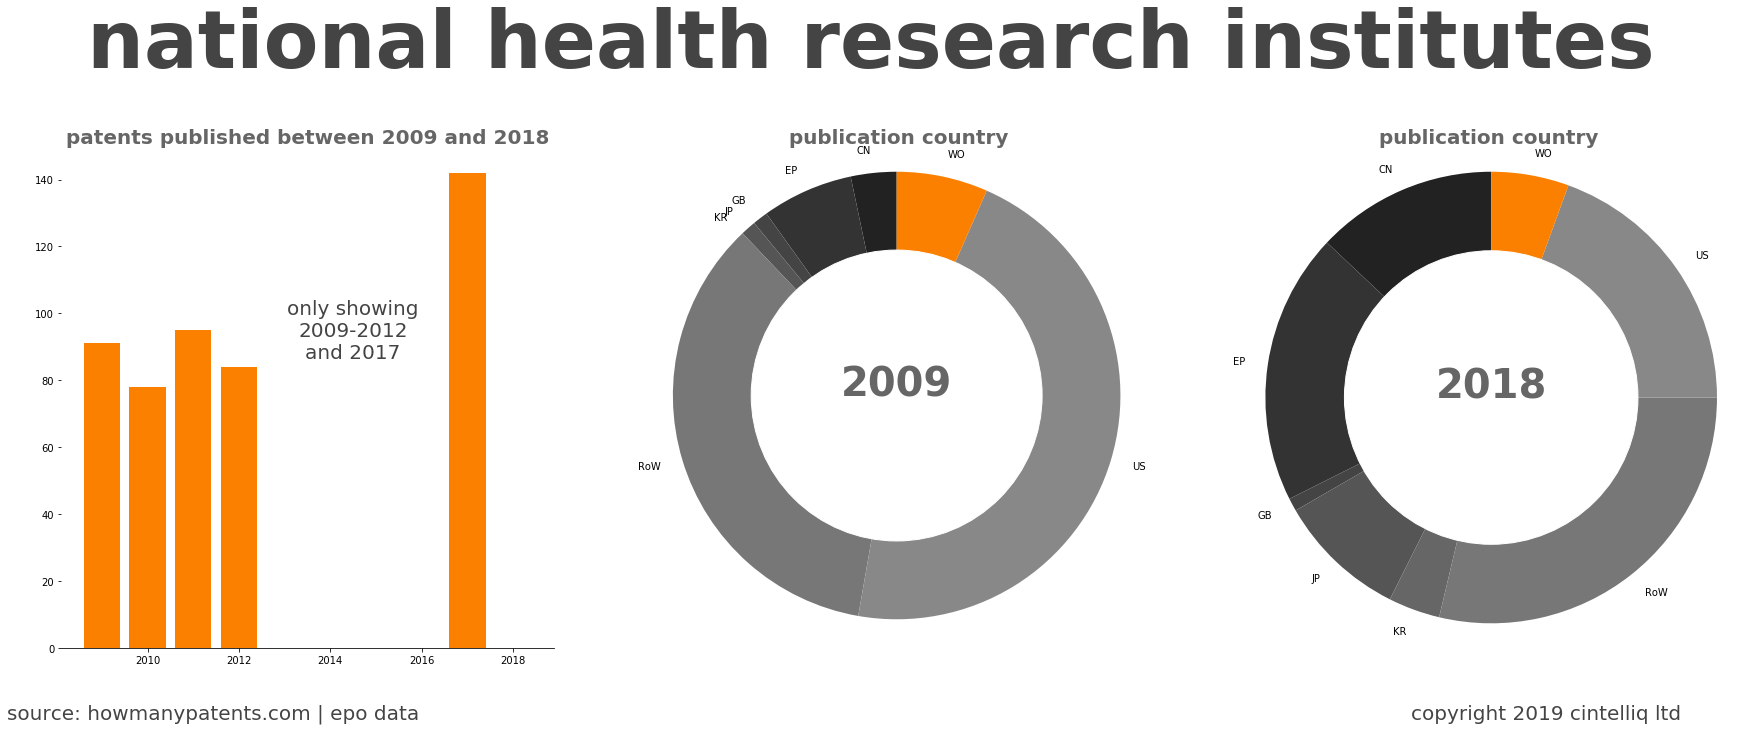 summary of patents for National Health Research Institutes